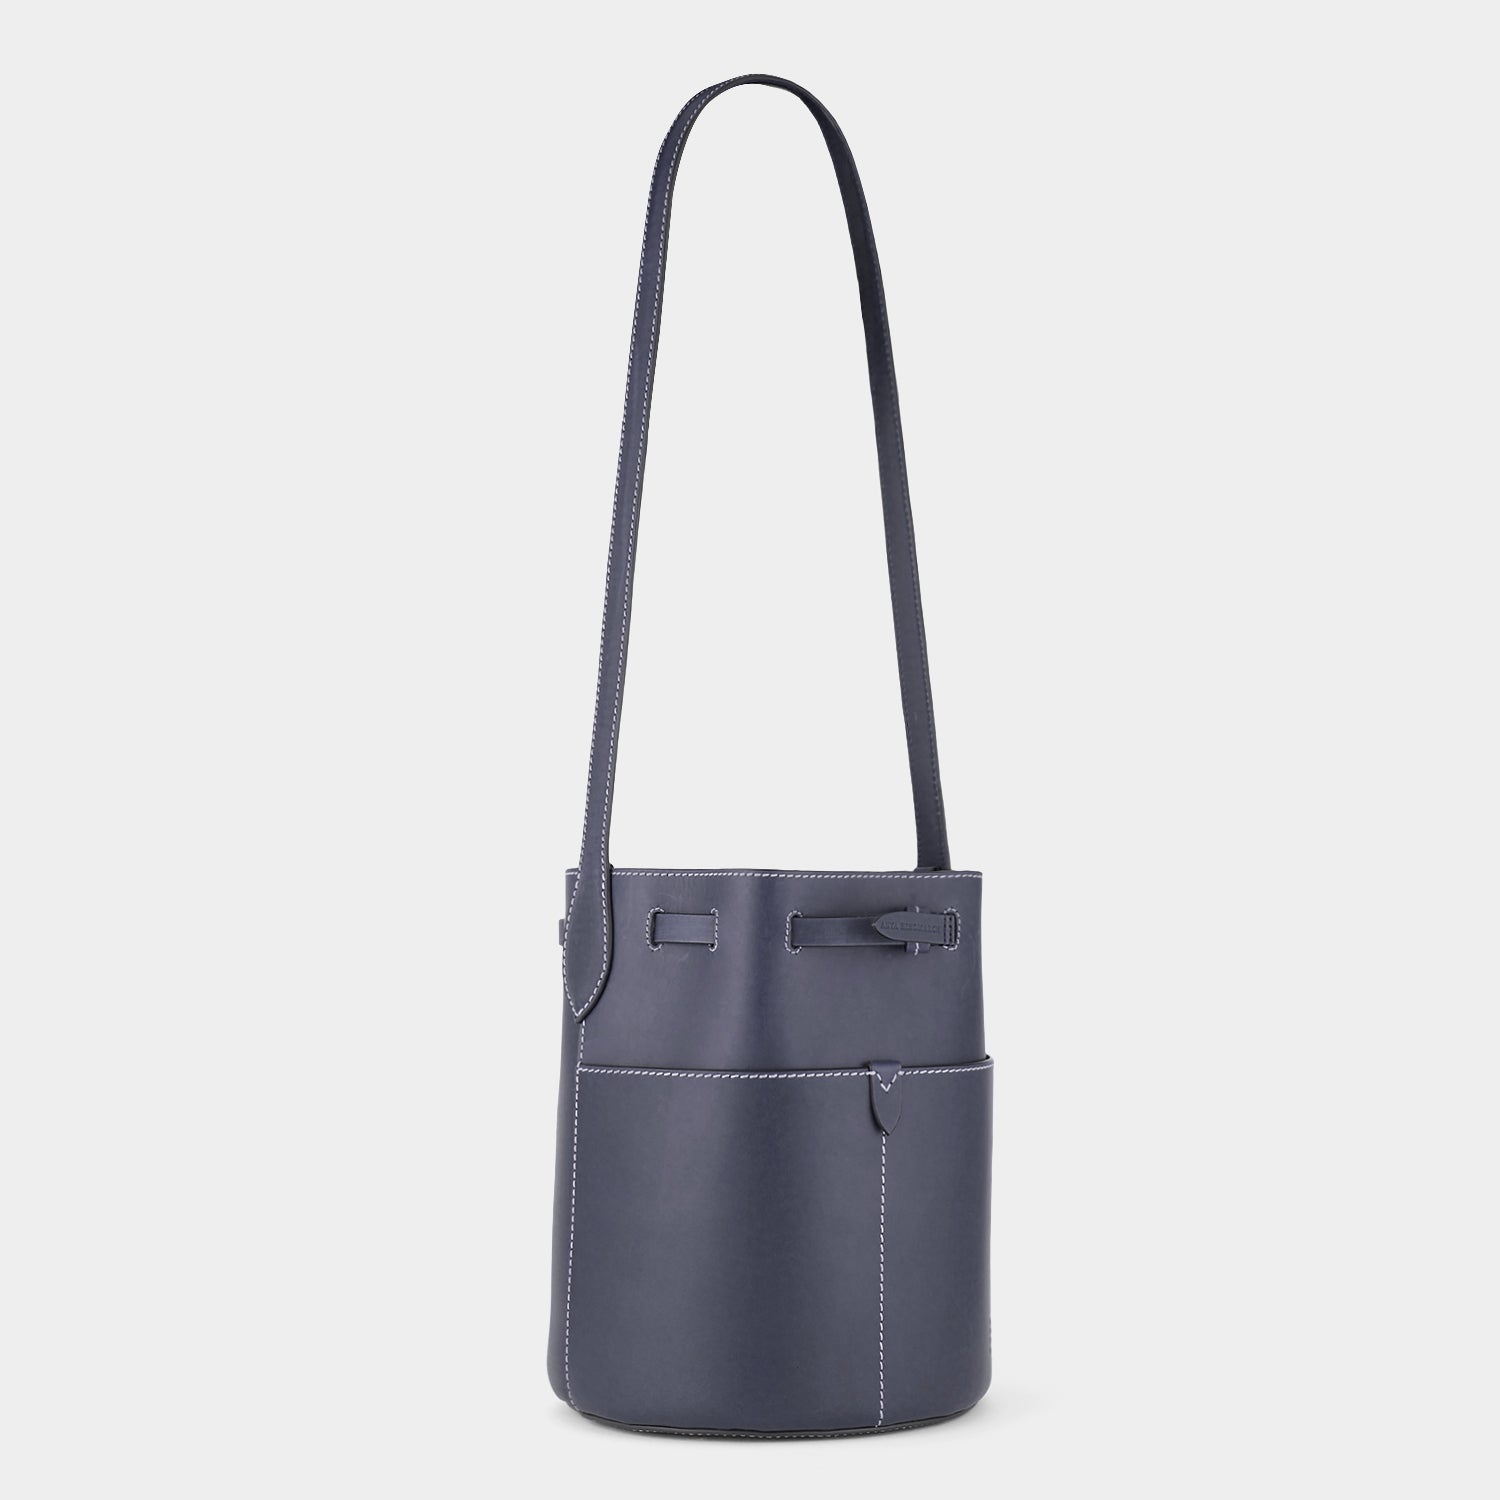 Return to Nature Small Bucket Bag -

                  
                    Compostable Leather in Marine -
                  

                  Anya Hindmarch UK
